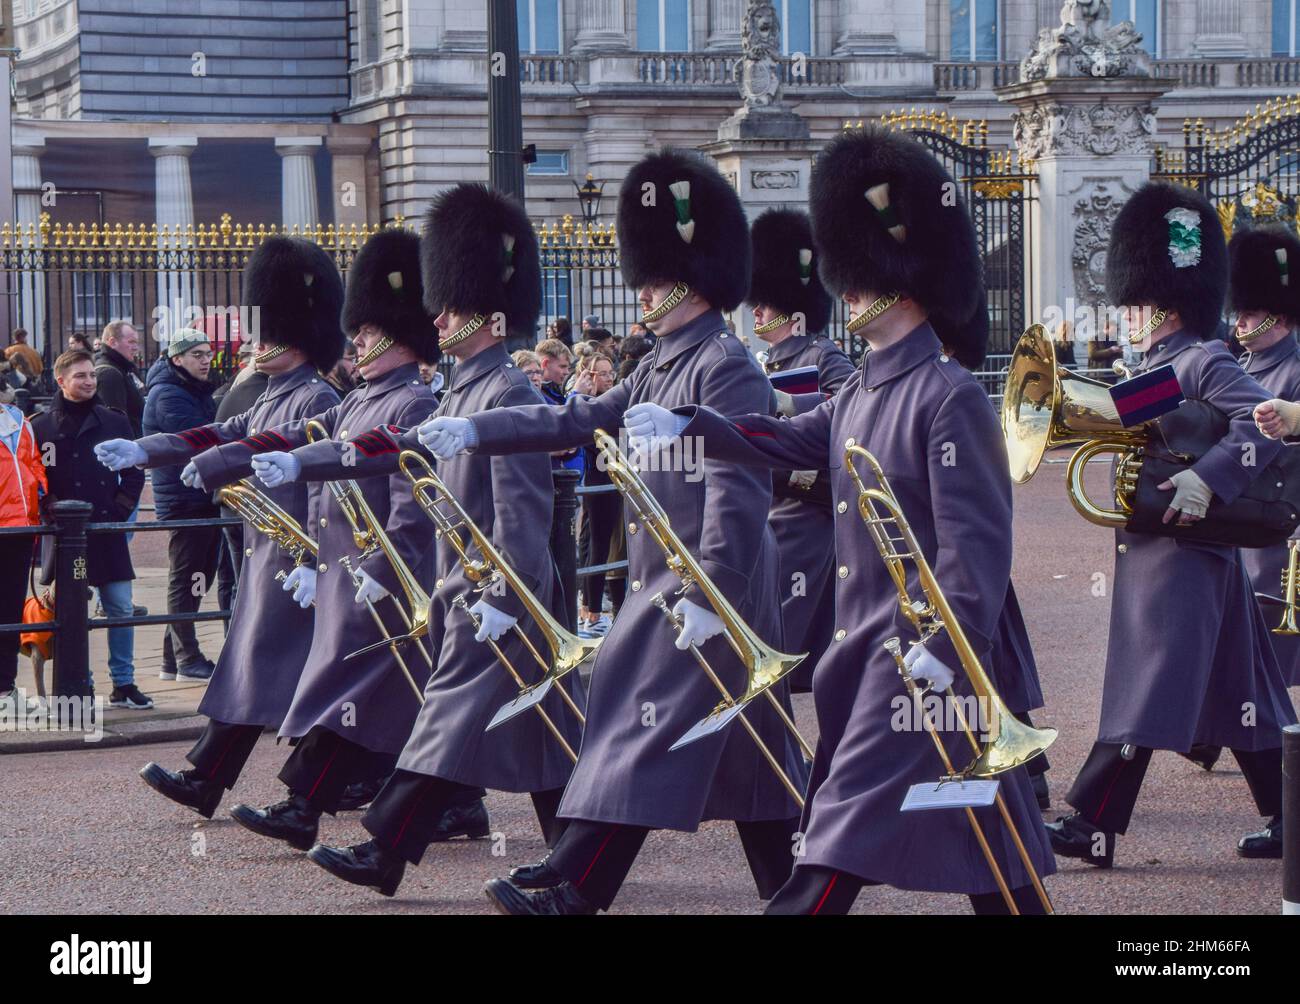 London, UK. 7th February 2022. Queen's guards march past Buckingham Palace after the gun salute at Green Park, part of the Queen's Platinum Jubilee celebrations. Credit: Vuk Valcic / Alamy Live News Stock Photo